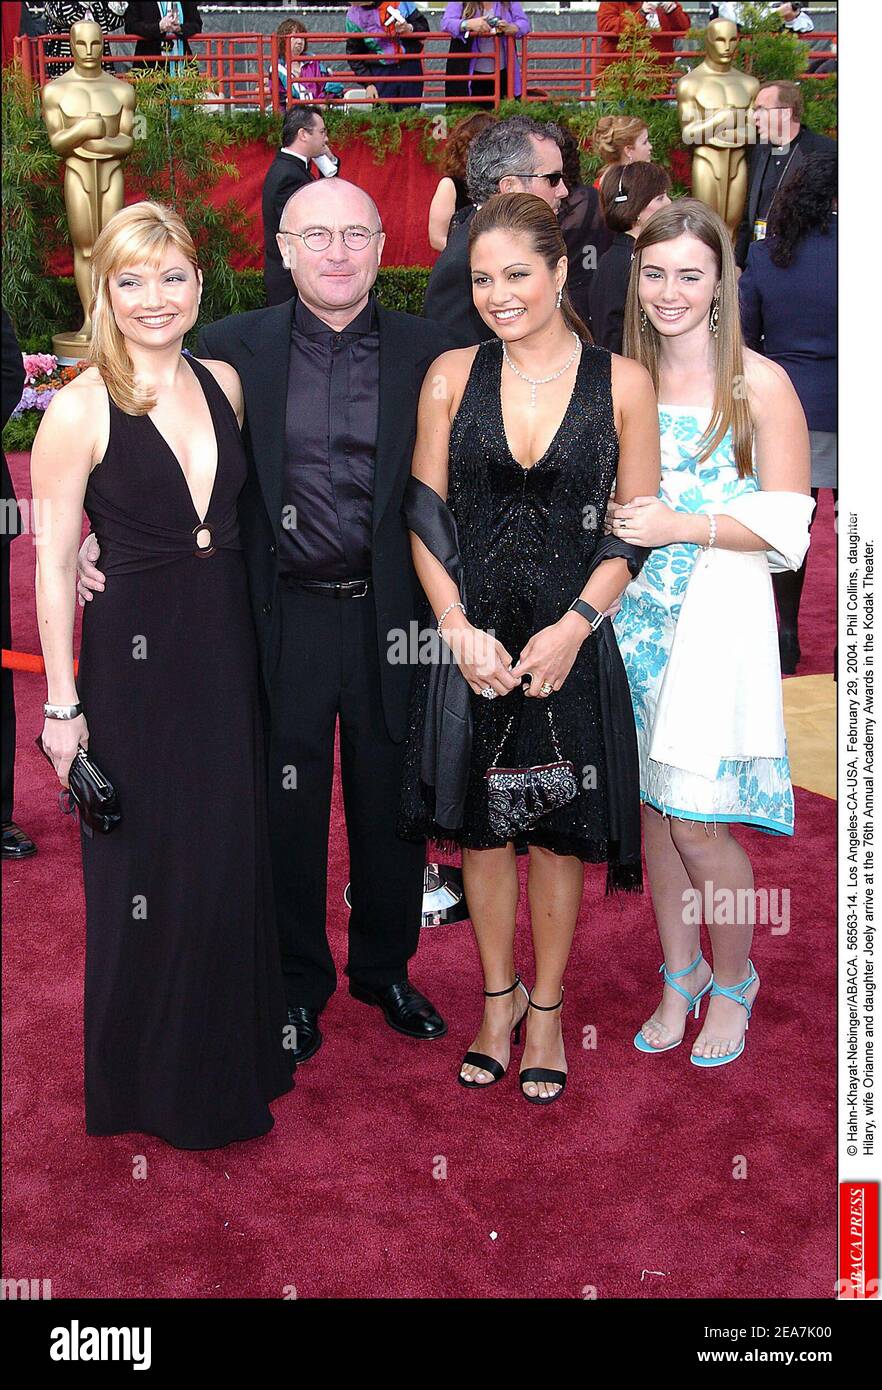 Phil Collins , daughter Hilary, wife Orianne and daughter Joely at the The 76th Annual Academy Awards on Sunday, February 29th, 2004 at the Kodak Theatre in Los Angeles-CA. (Pictured: Phil Collins) Photo by Hahn-Khayat-Nebinger/ABACA Stock Photo